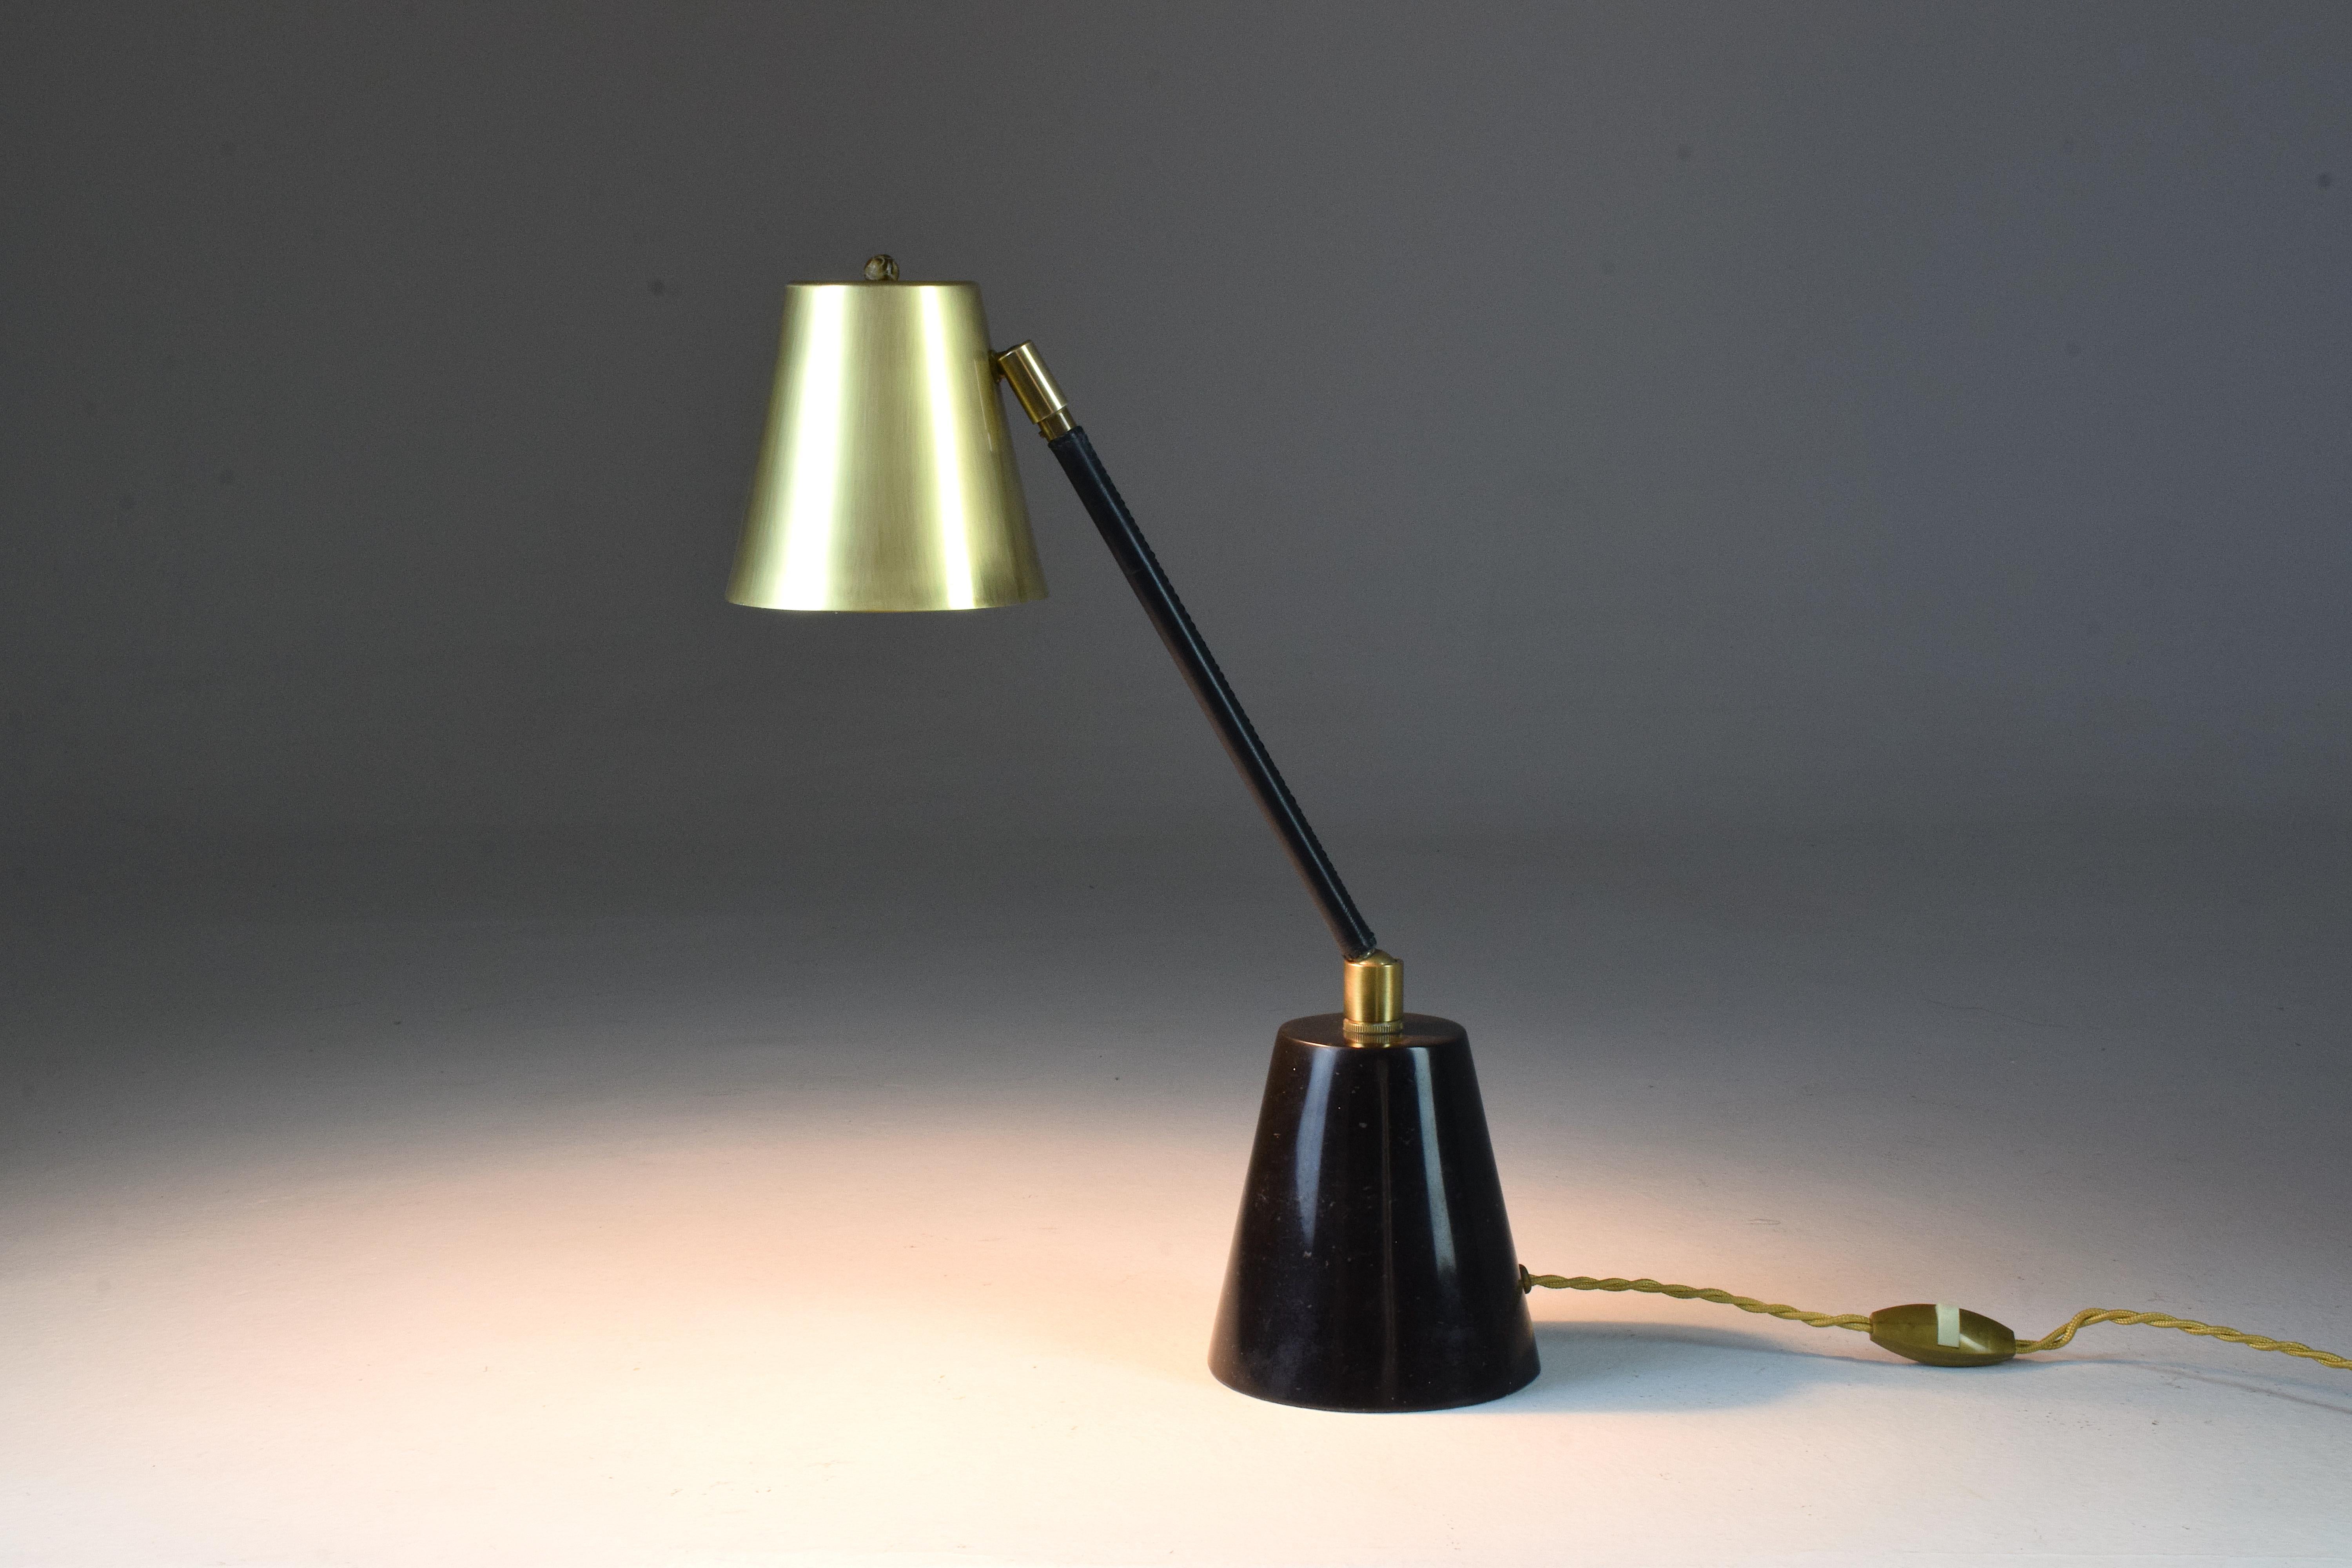 Contemporary handcrafted articulating table lamp designed in a gold polished brass stem adorned with a black sheathed leather detail hand sewn by artisan saddle makers which articulates at the base with a ball joint. The shade is designed out of